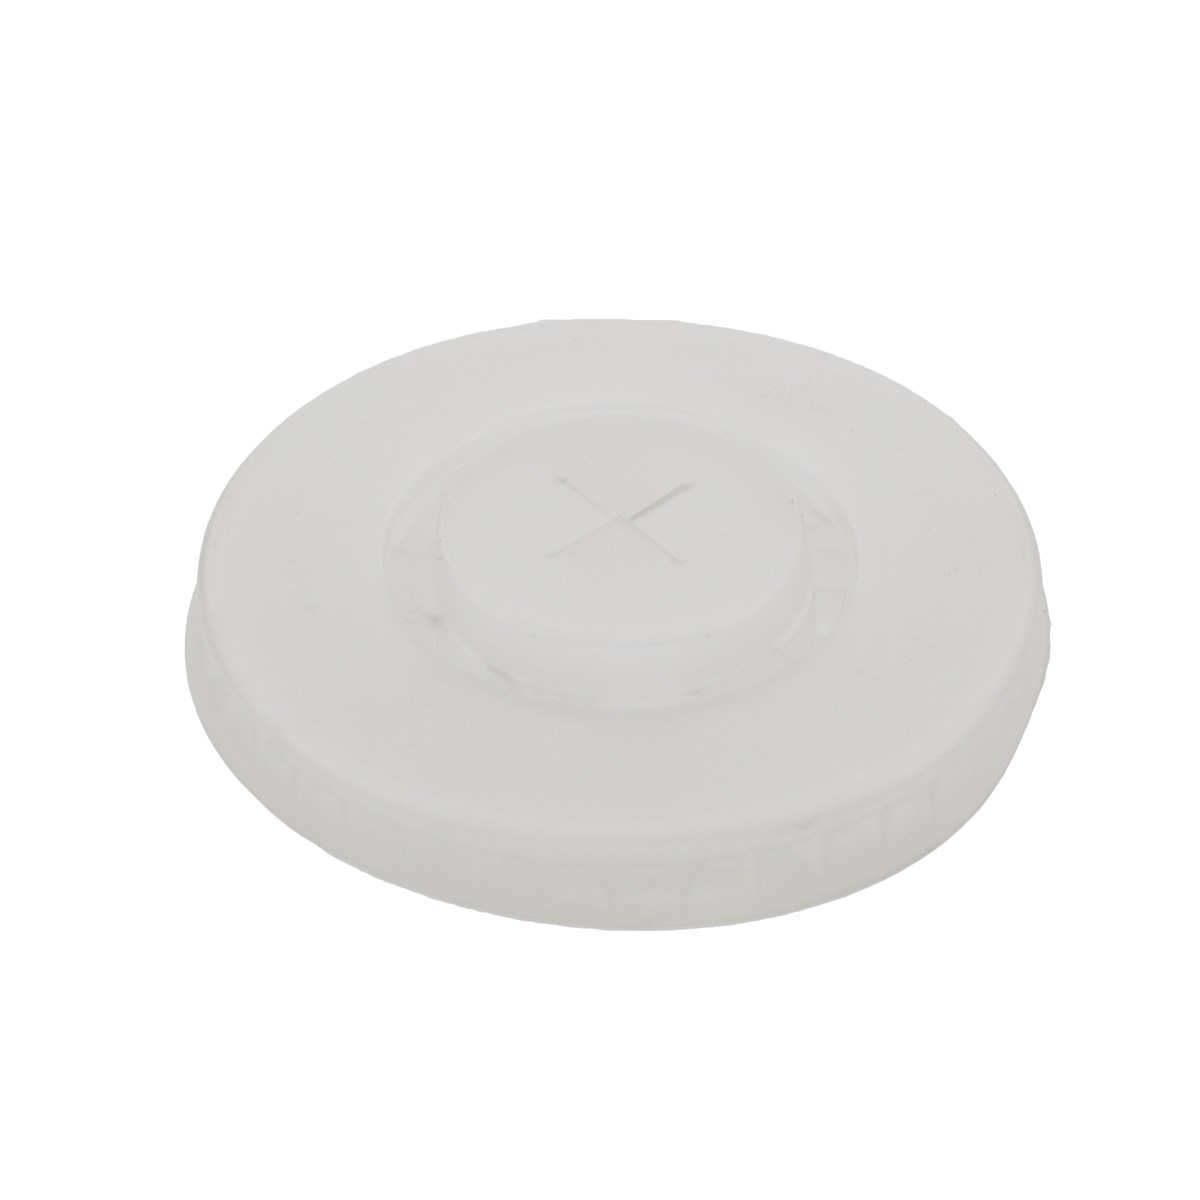 80MM Transparent Plastic Cold Cup Lids With Straw Slot